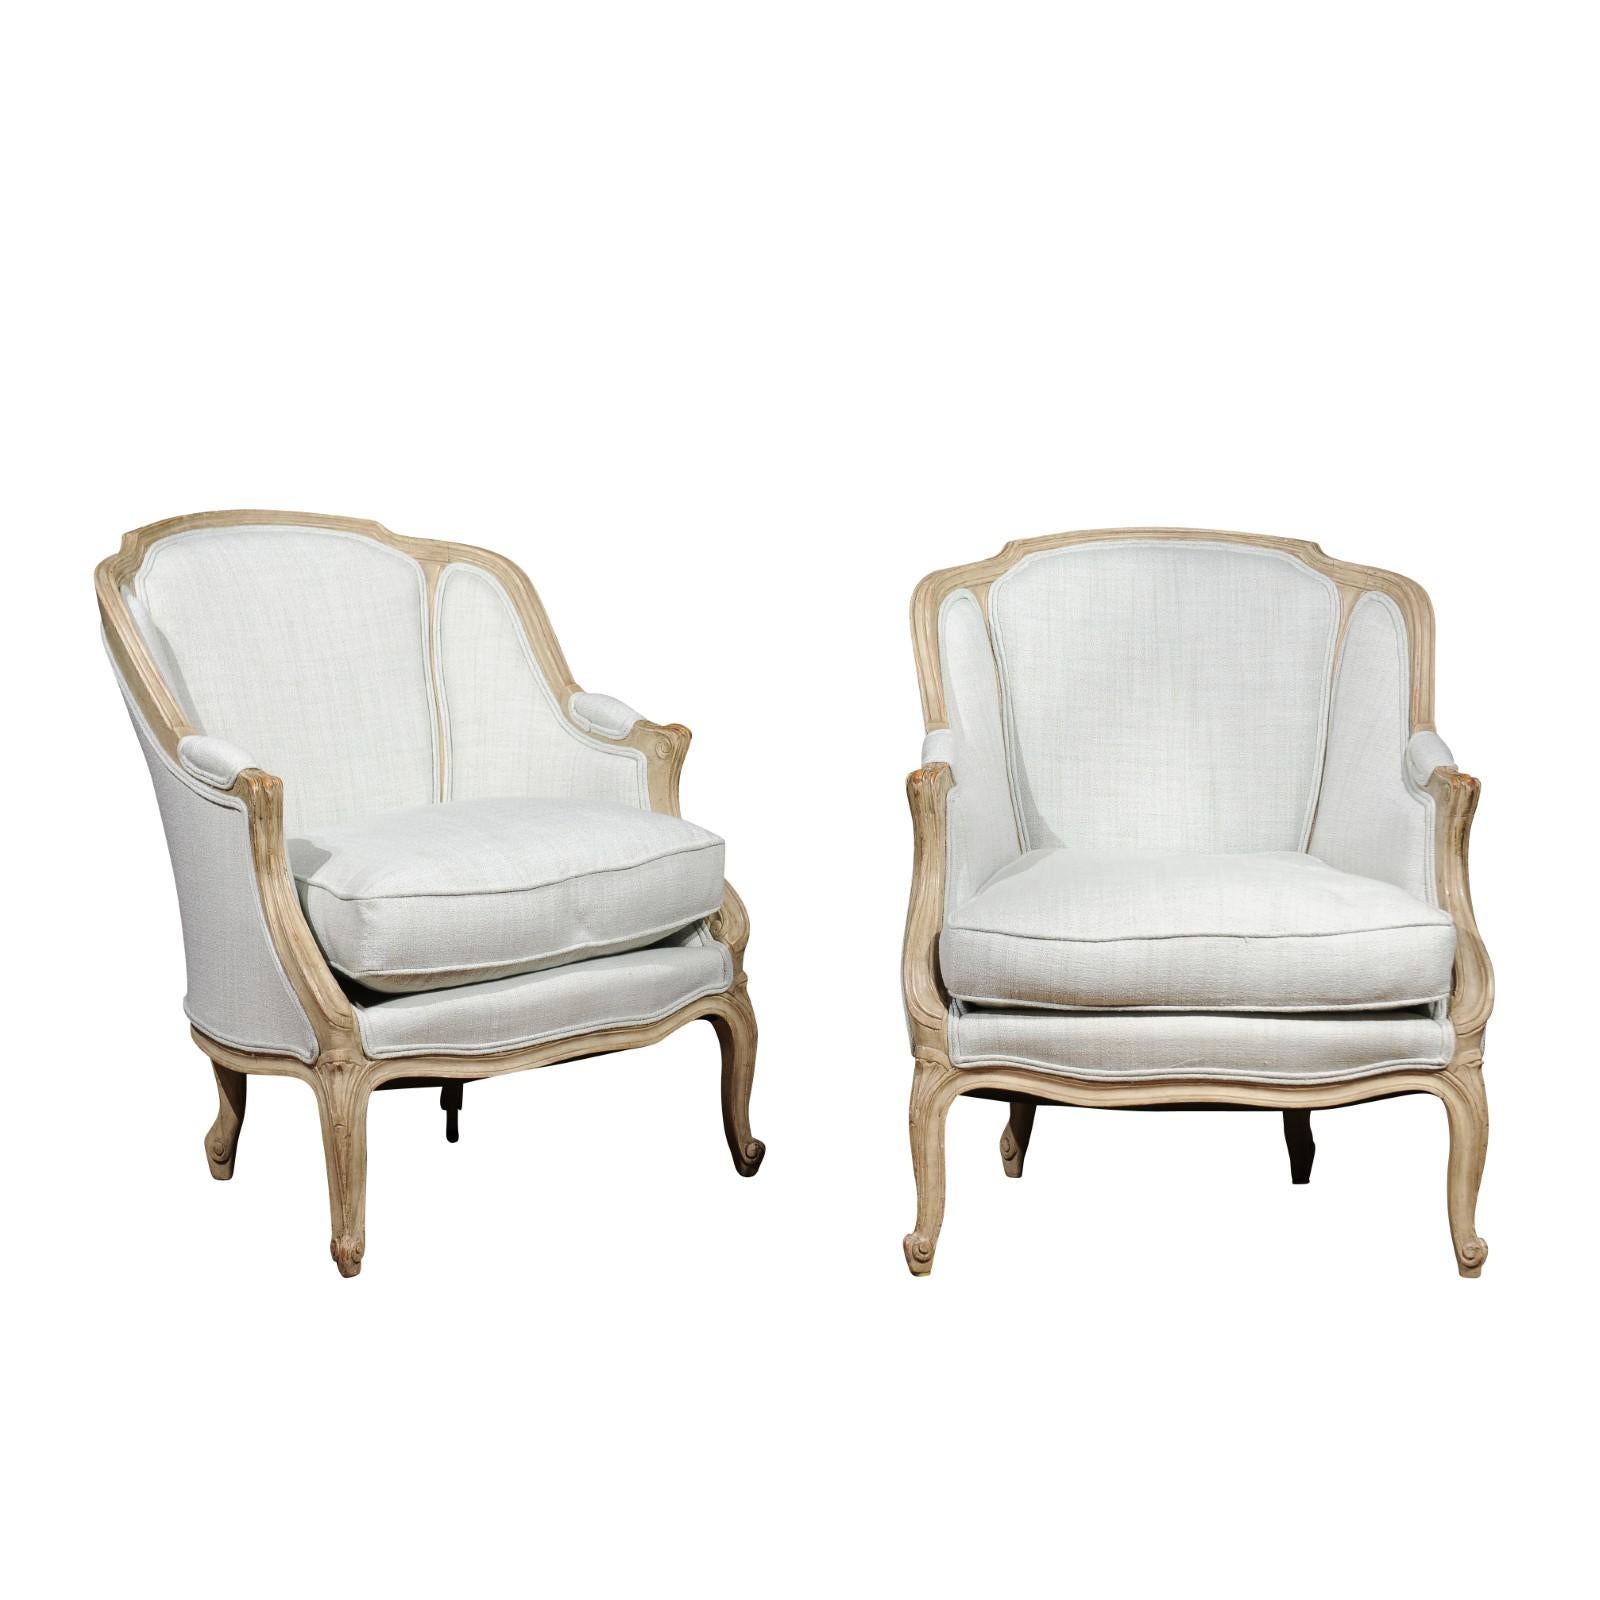 Pair of French Louis XV Style 1880s Bergères Chairs with Wraparound Backs